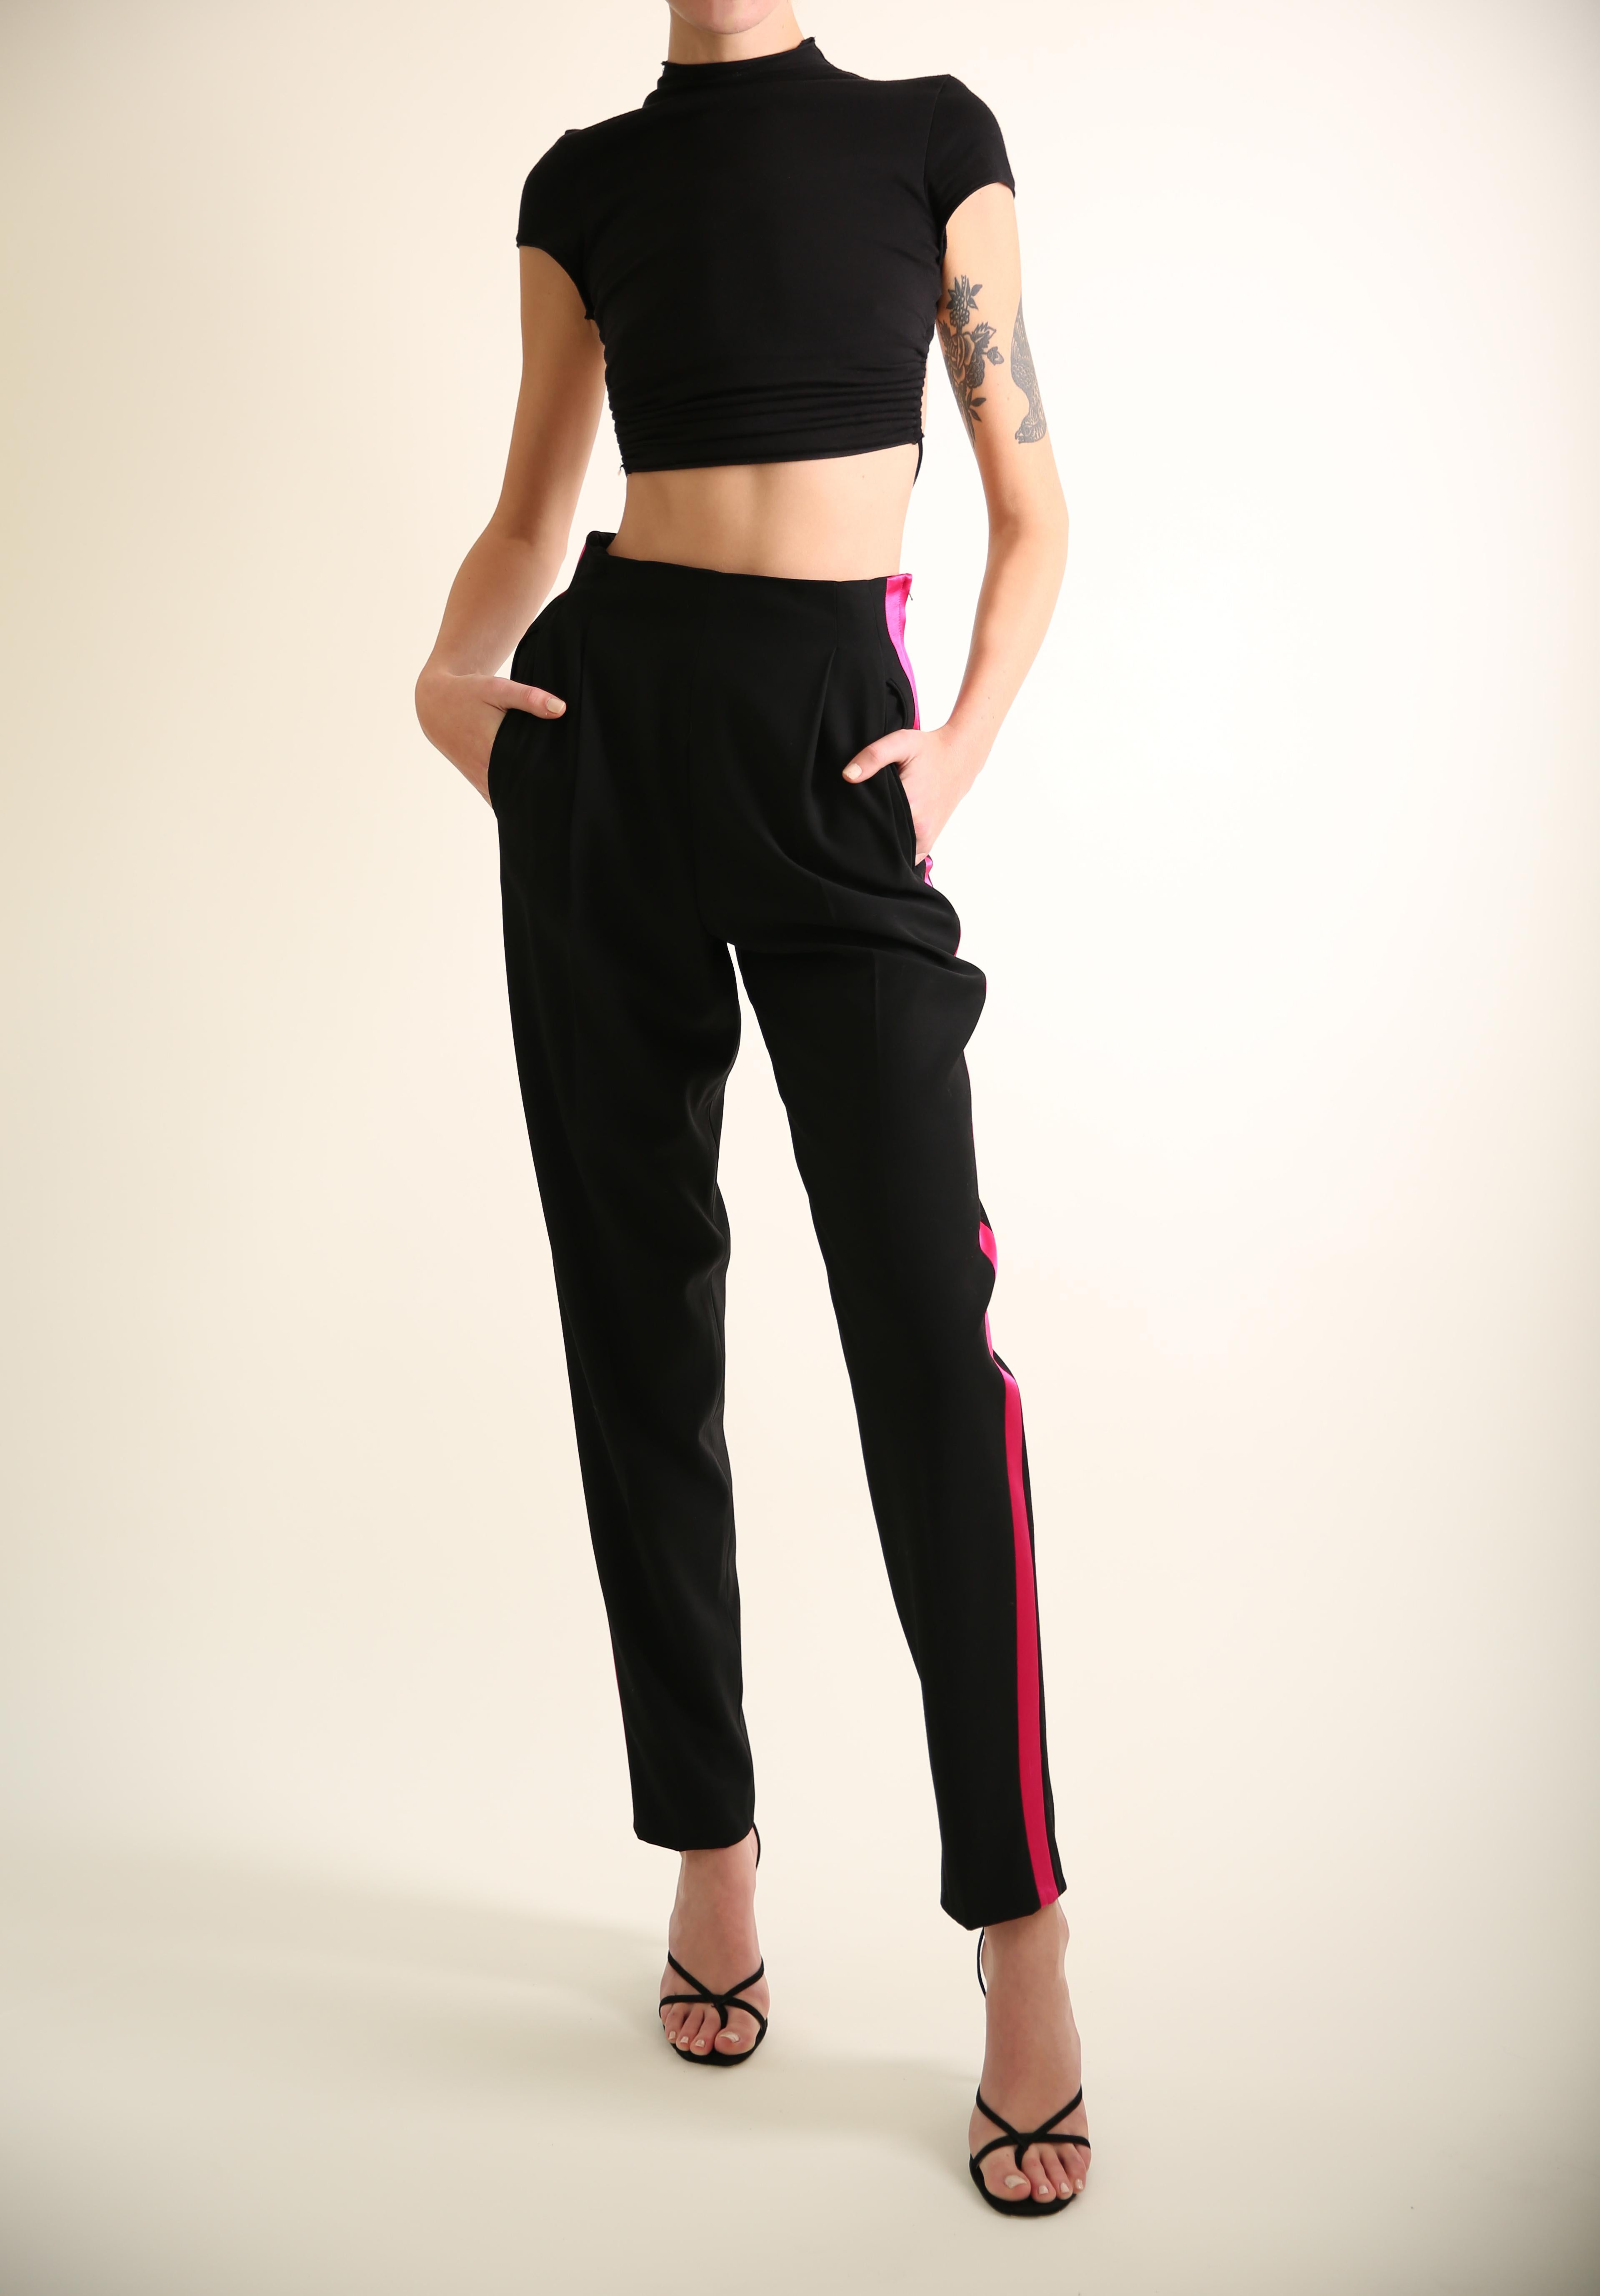 Gianfrano Ferre vtg black wool pink side satin stripe high waisted tuxedo pants  In Excellent Condition For Sale In Paris, FR